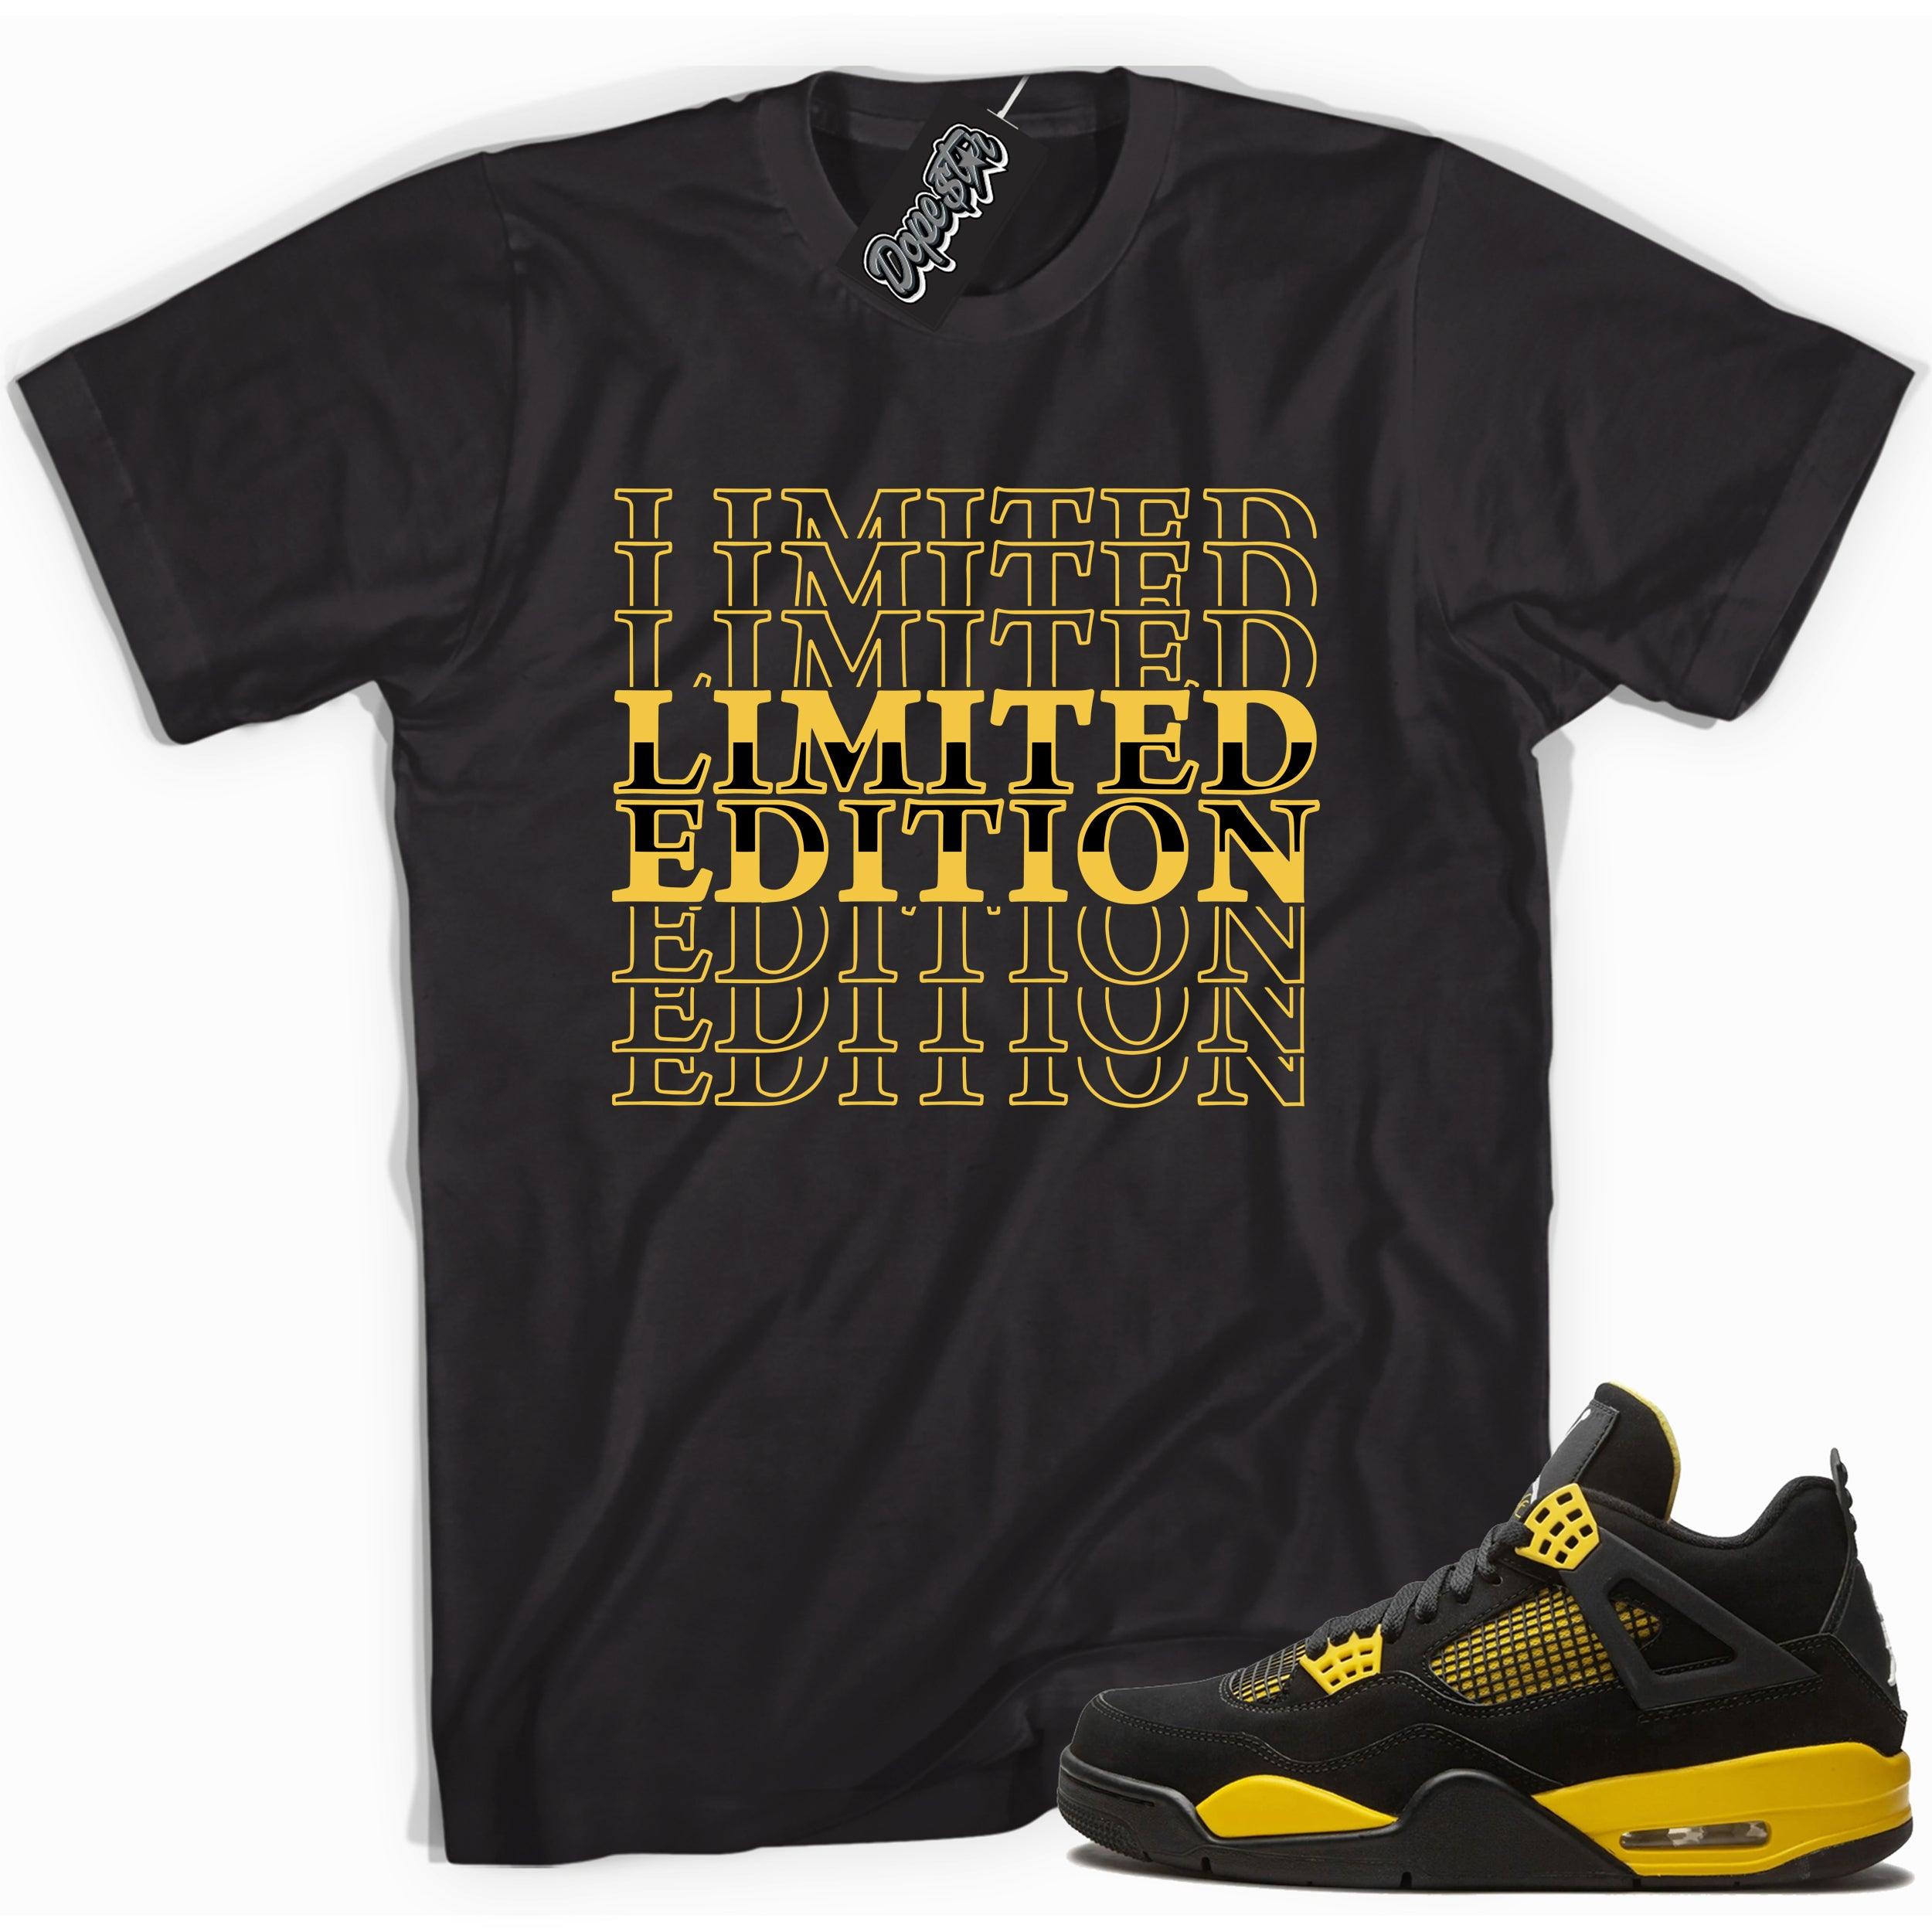 Cool black graphic tee with 'limited edition' print, that perfectly matches  Air Jordan 4 Thunder sneakers